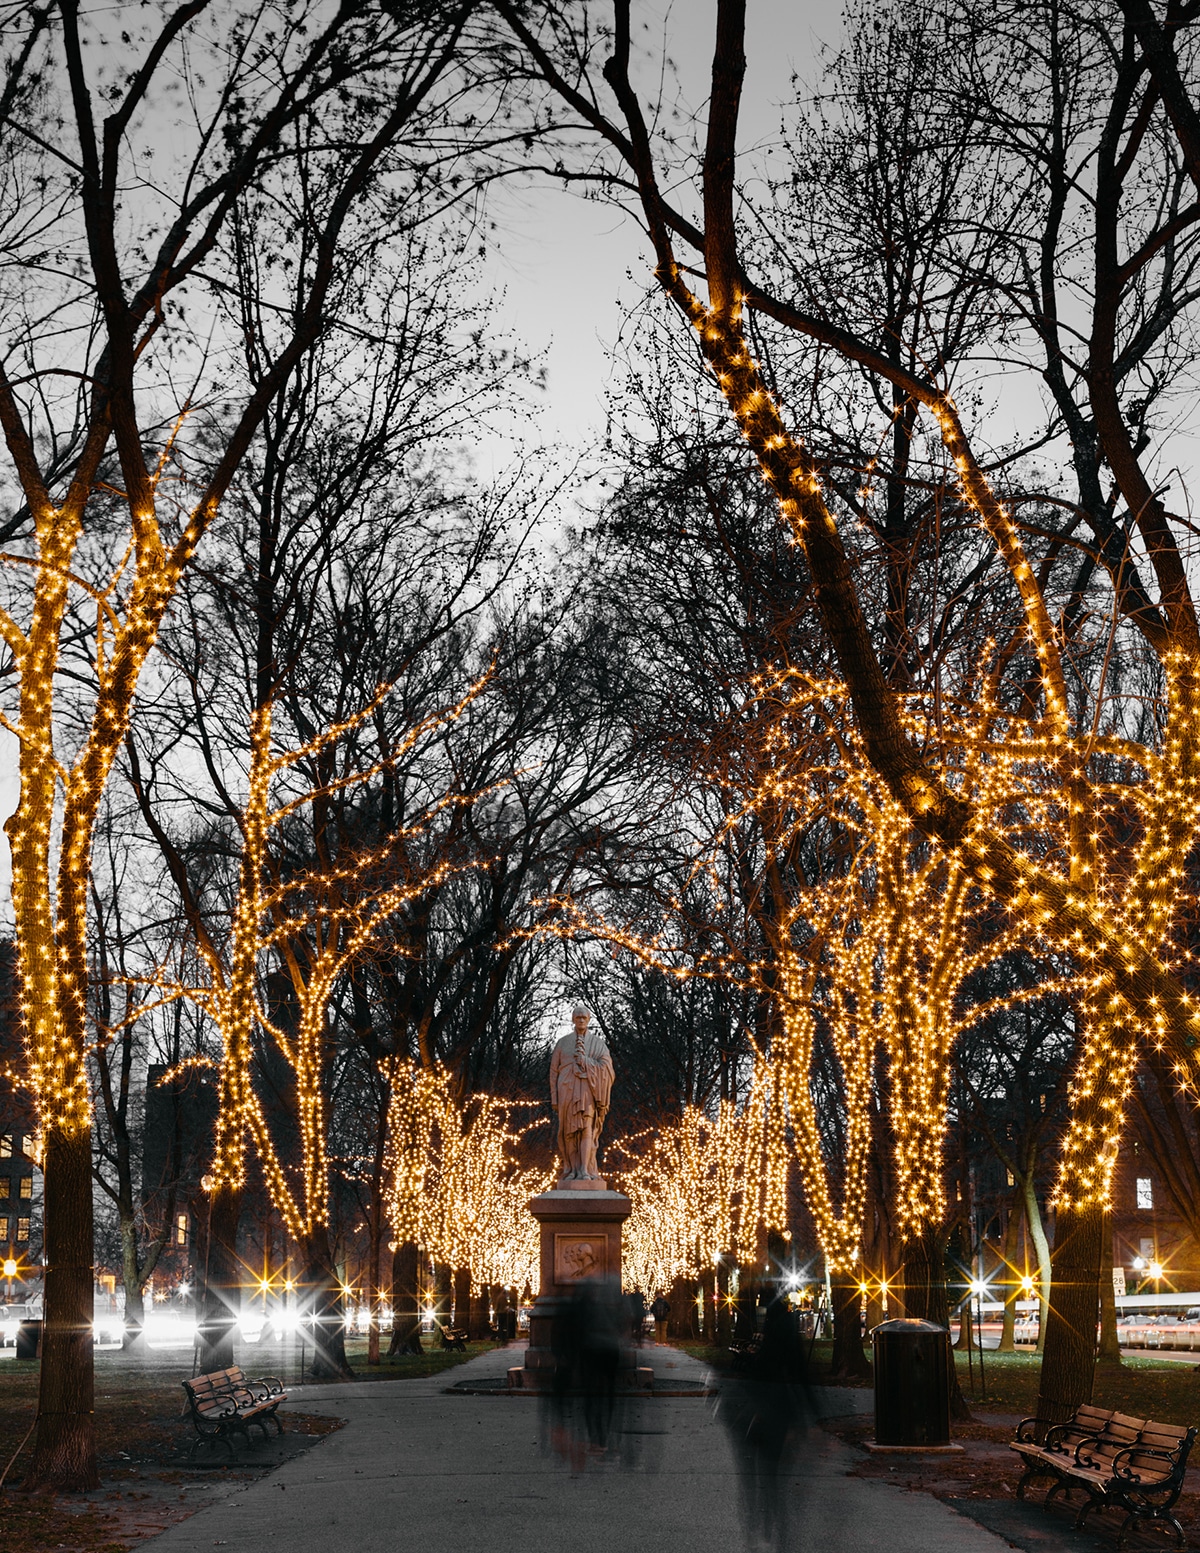 A statue of Alexander Hamilton on Commonwealth Avenue takes center stage illuminated by the holiday lights in the trees.